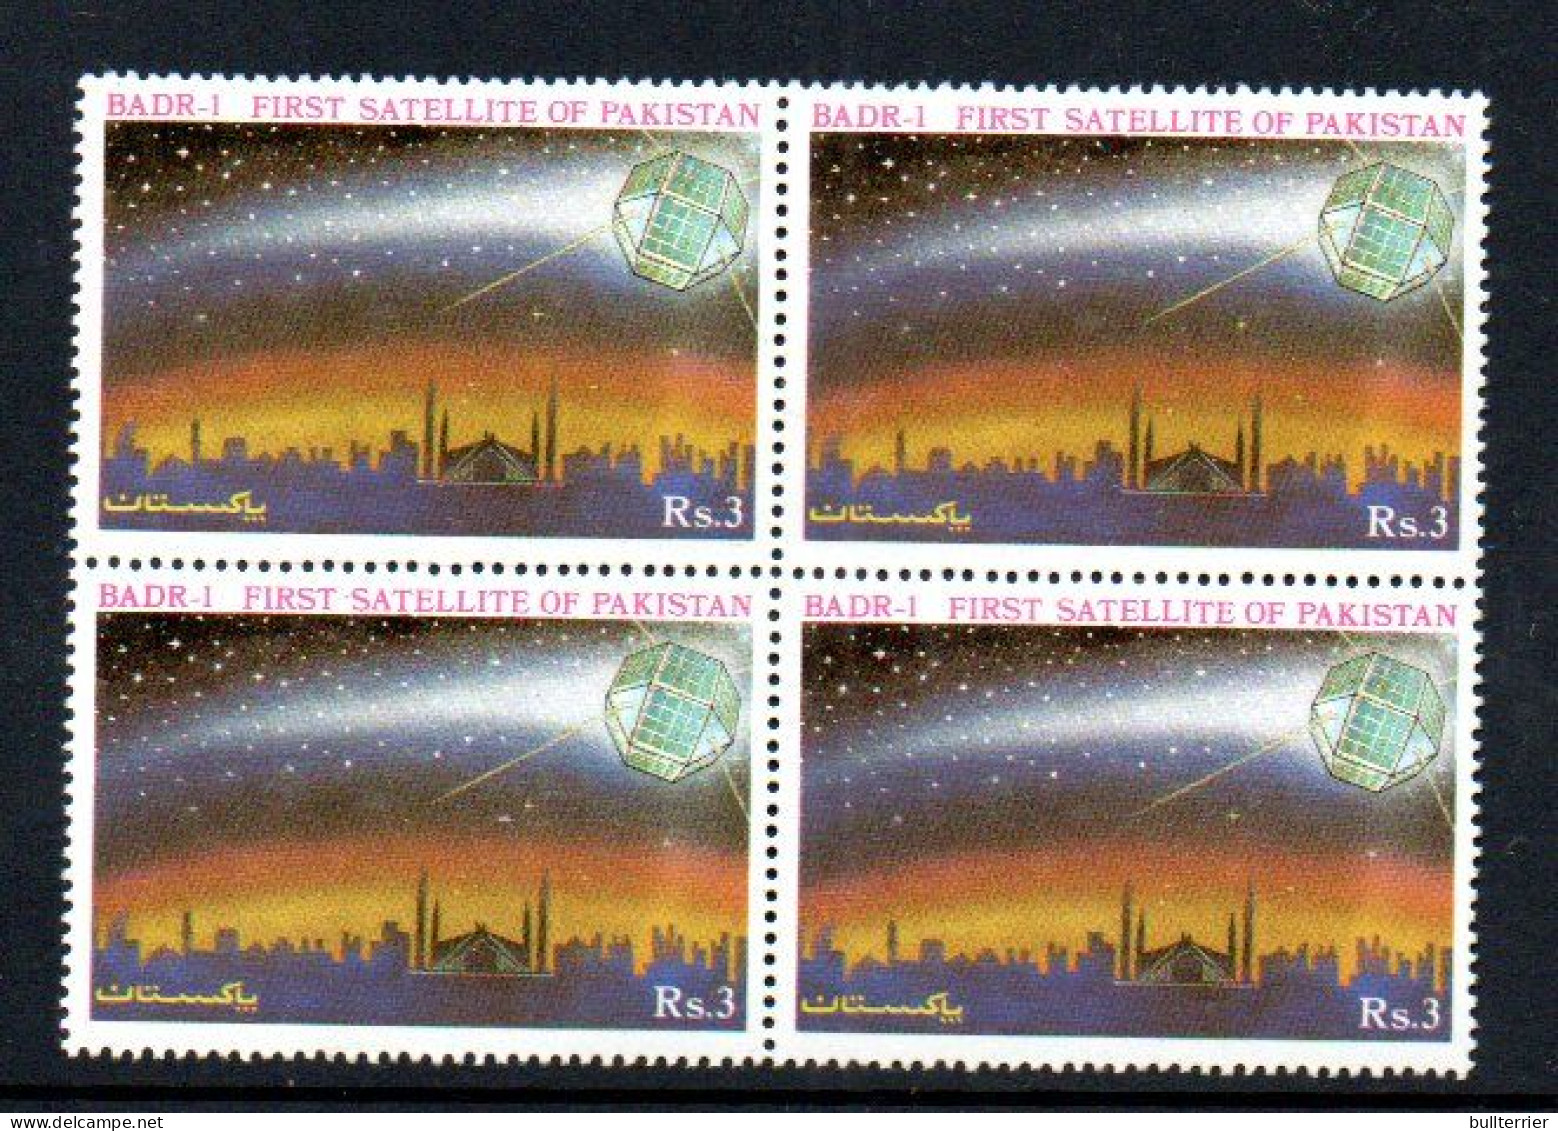 SPACE - PAKISTAN - 1990 - LAUNCHING OF BADR 1 FIRST SATELLITTEE BLOCK OF 4  MINT NEVER HINGED, SG CAT £14 - Asien